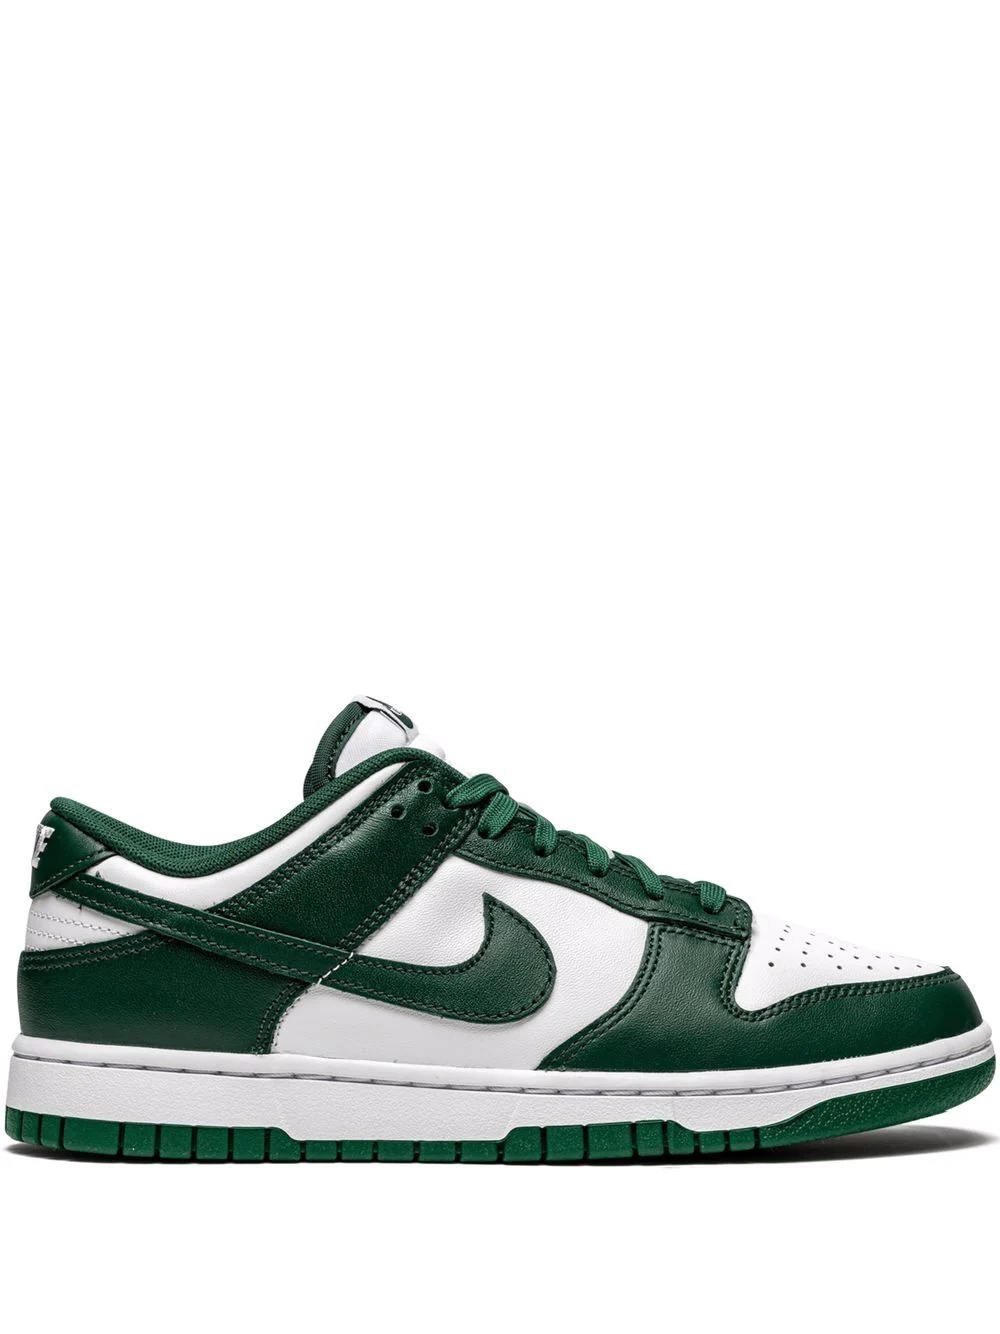 Dunk Low "Team Green" sneakers - 1